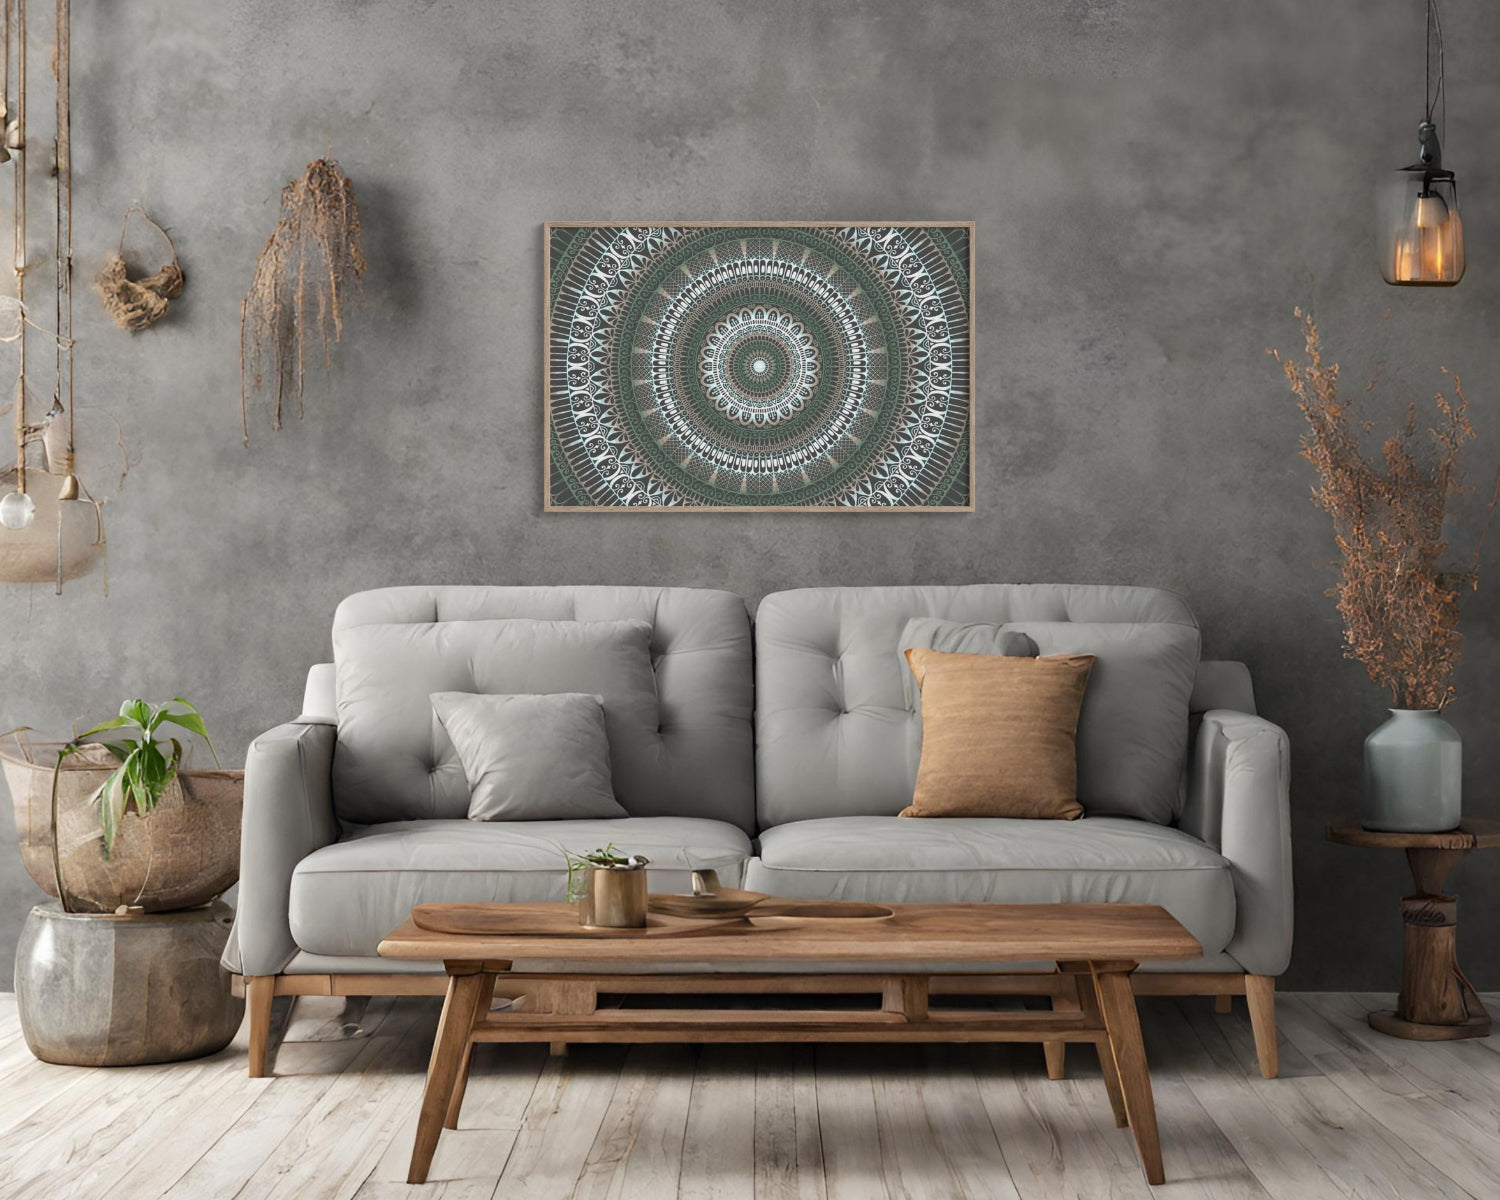 a grey sofa in a boho style room and a poster with a green mandala design on a grey wall